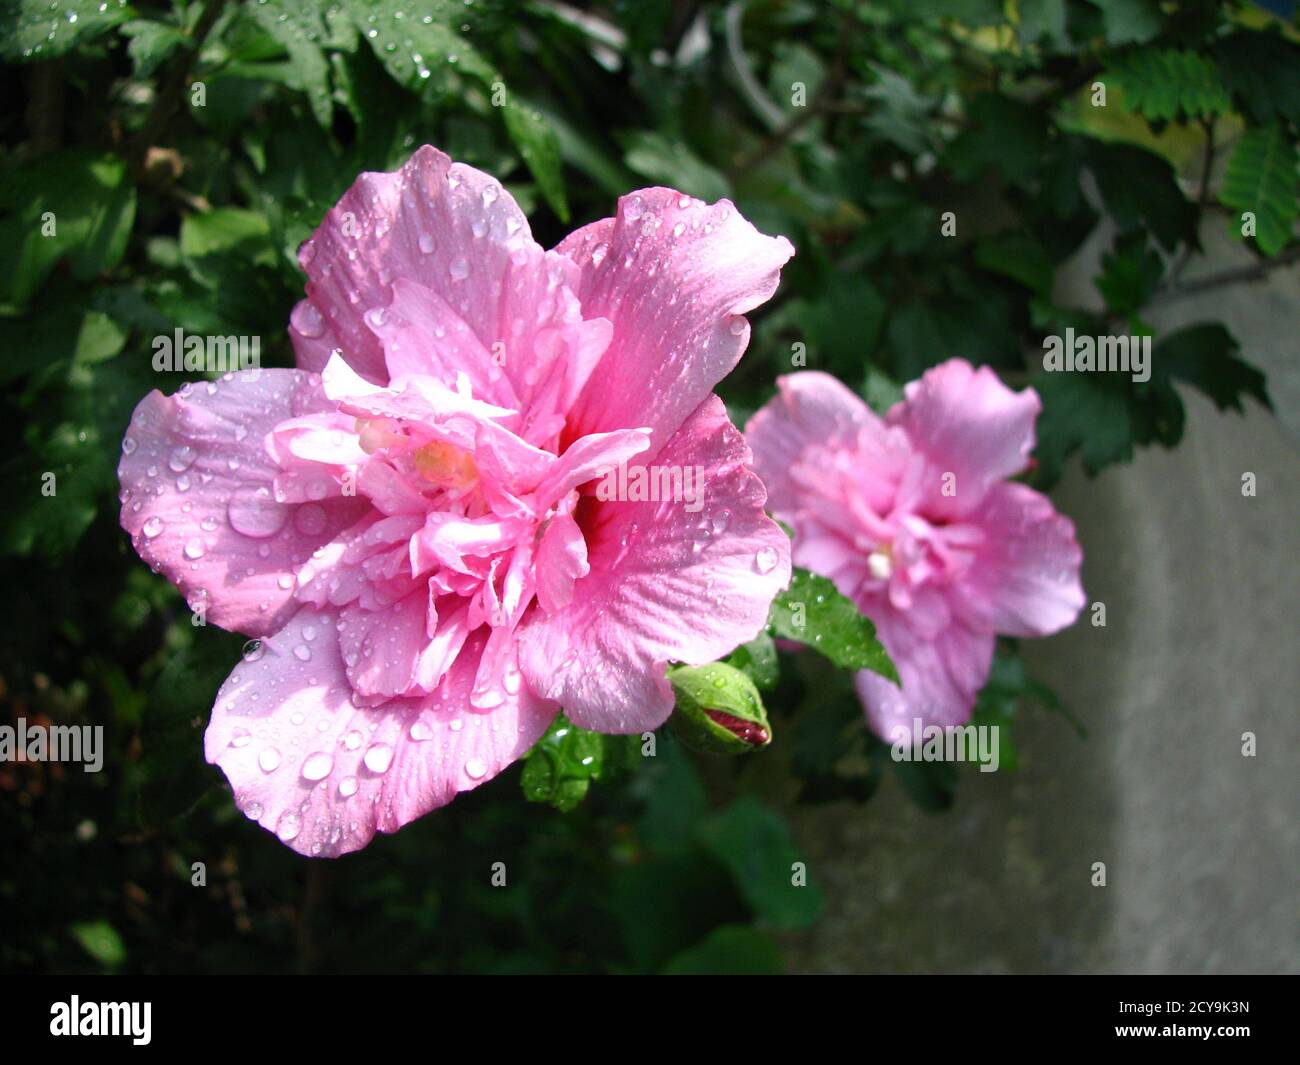 Closeup of 'Hibiscus syriacus 'Ardens' ' - a double-flowered plant with raindrops on it Stock Photo